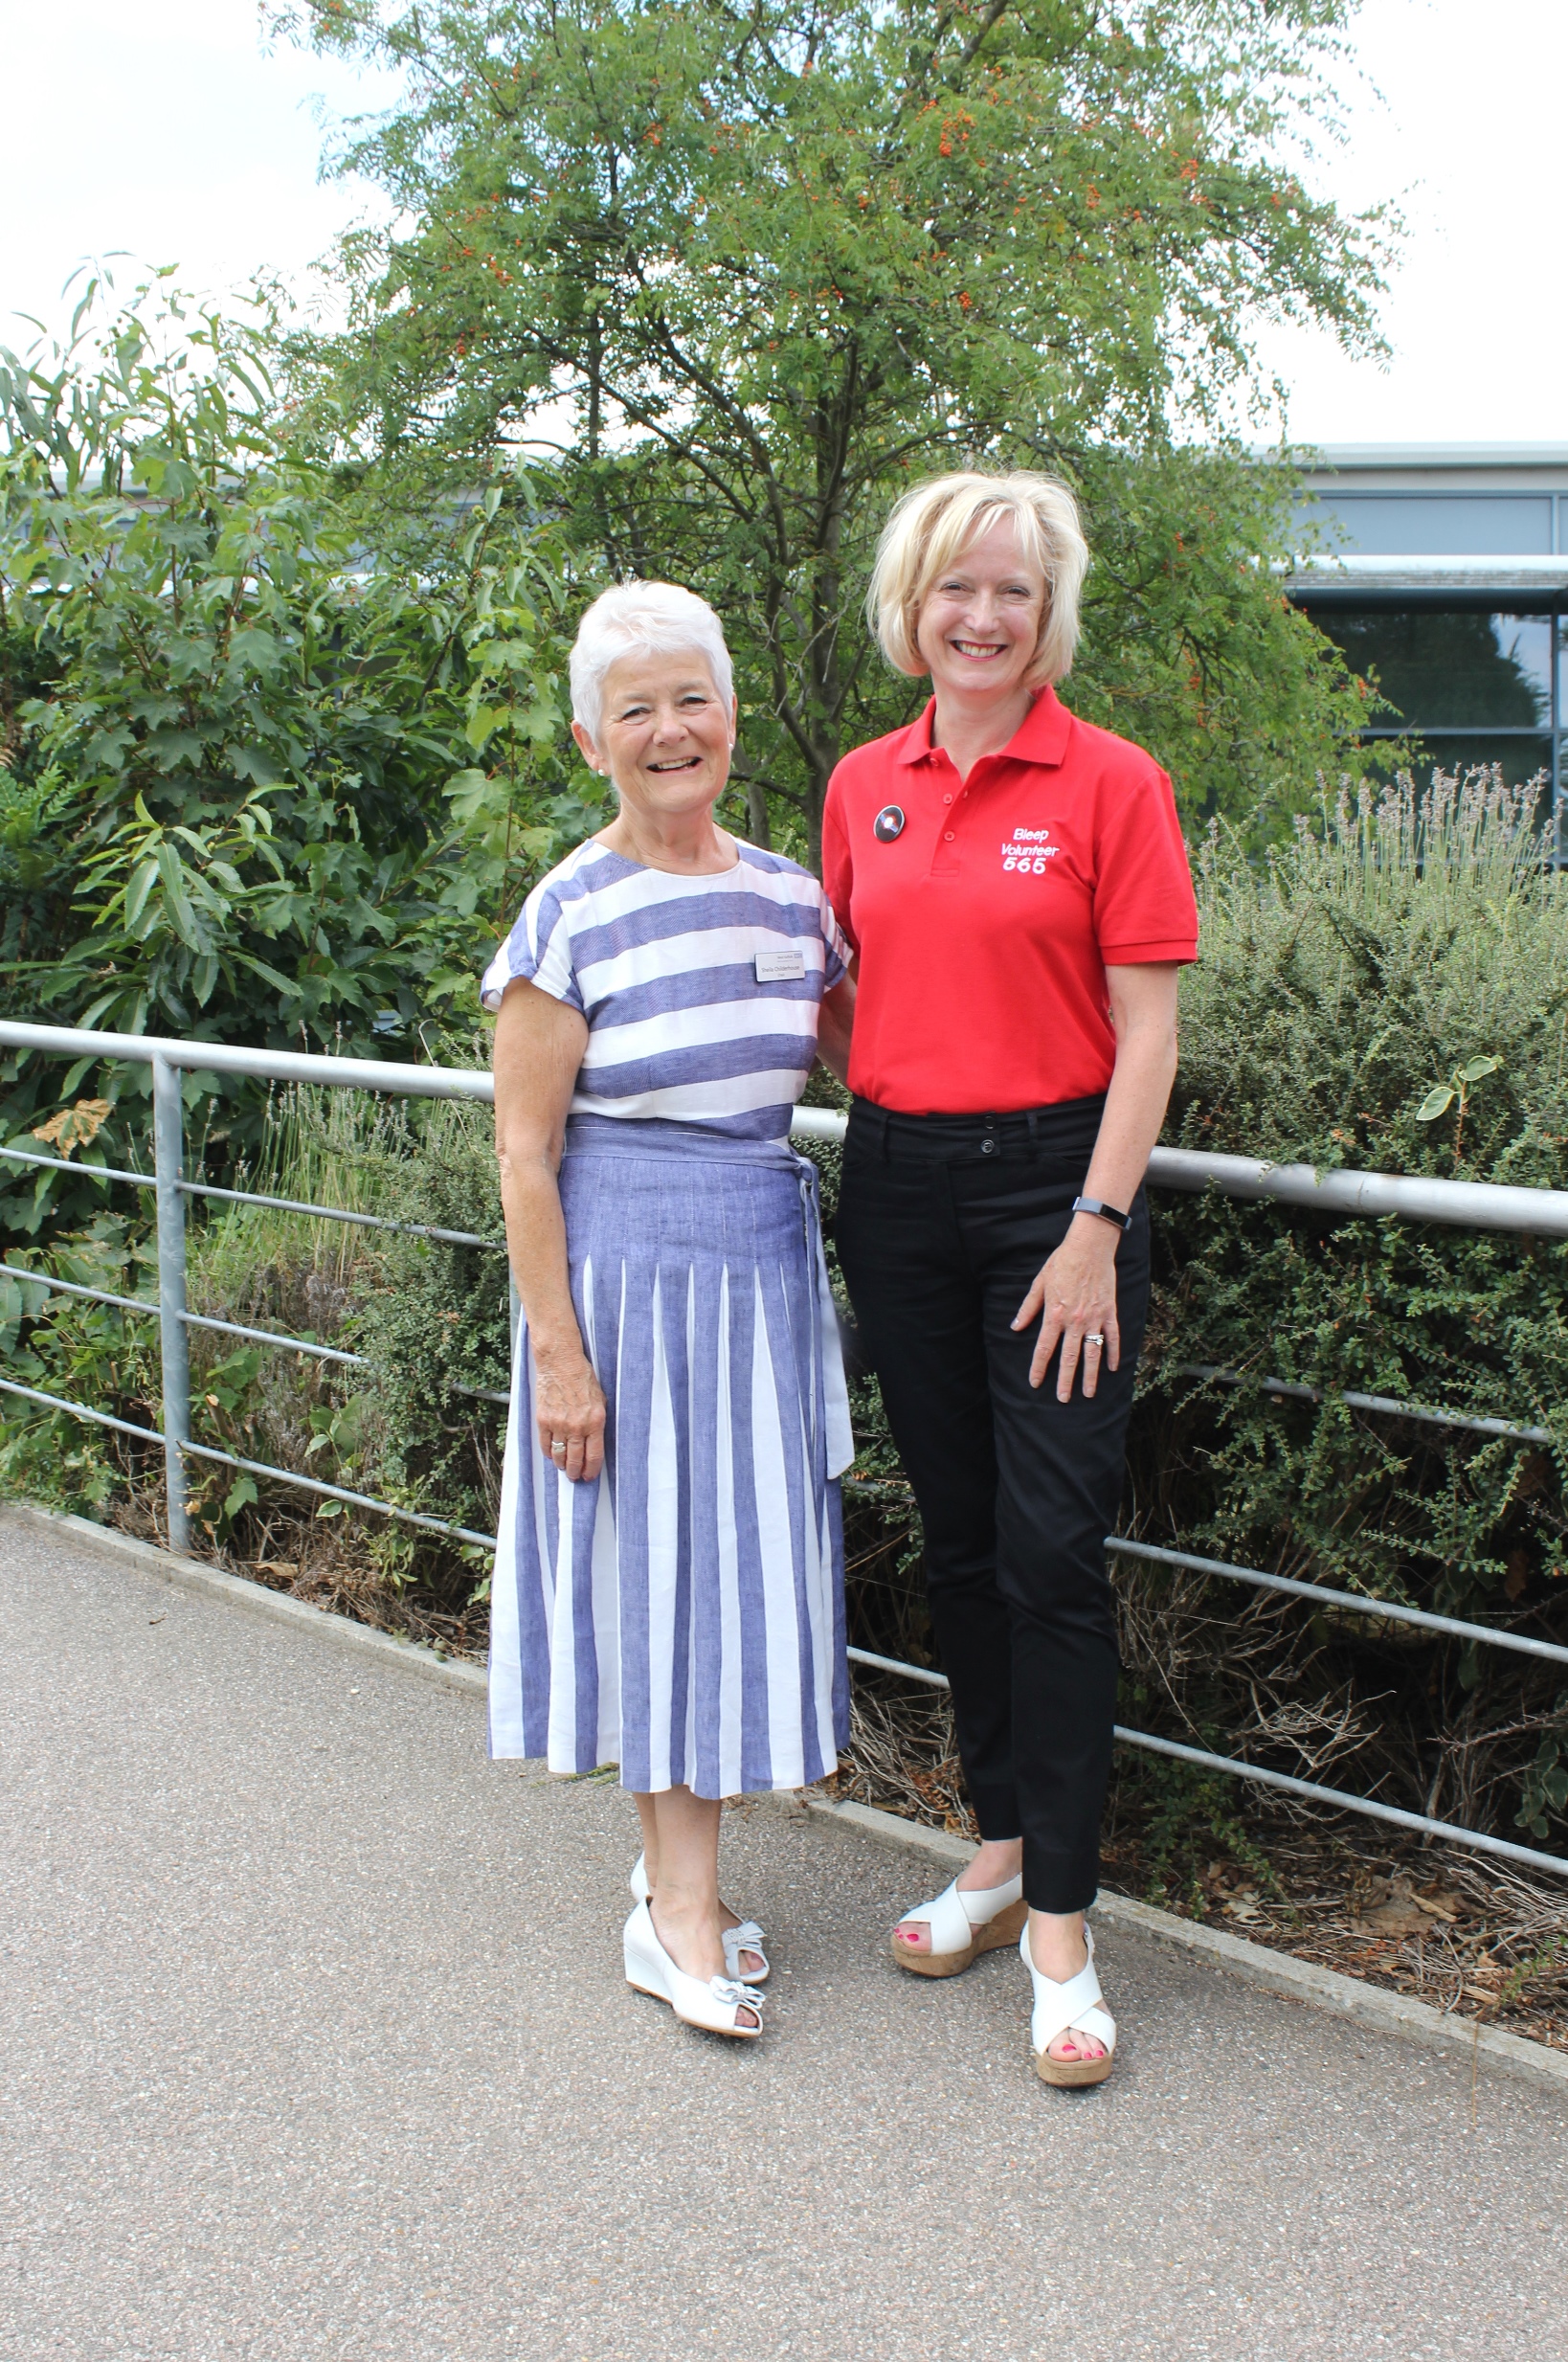 Ruth May, executive director of nursing at NHS Improvement (right), wearing a West Suffolk NHS Foundation Trust ‘bleep’ volunteer uniform with Sheila Childerhouse, Trust chair